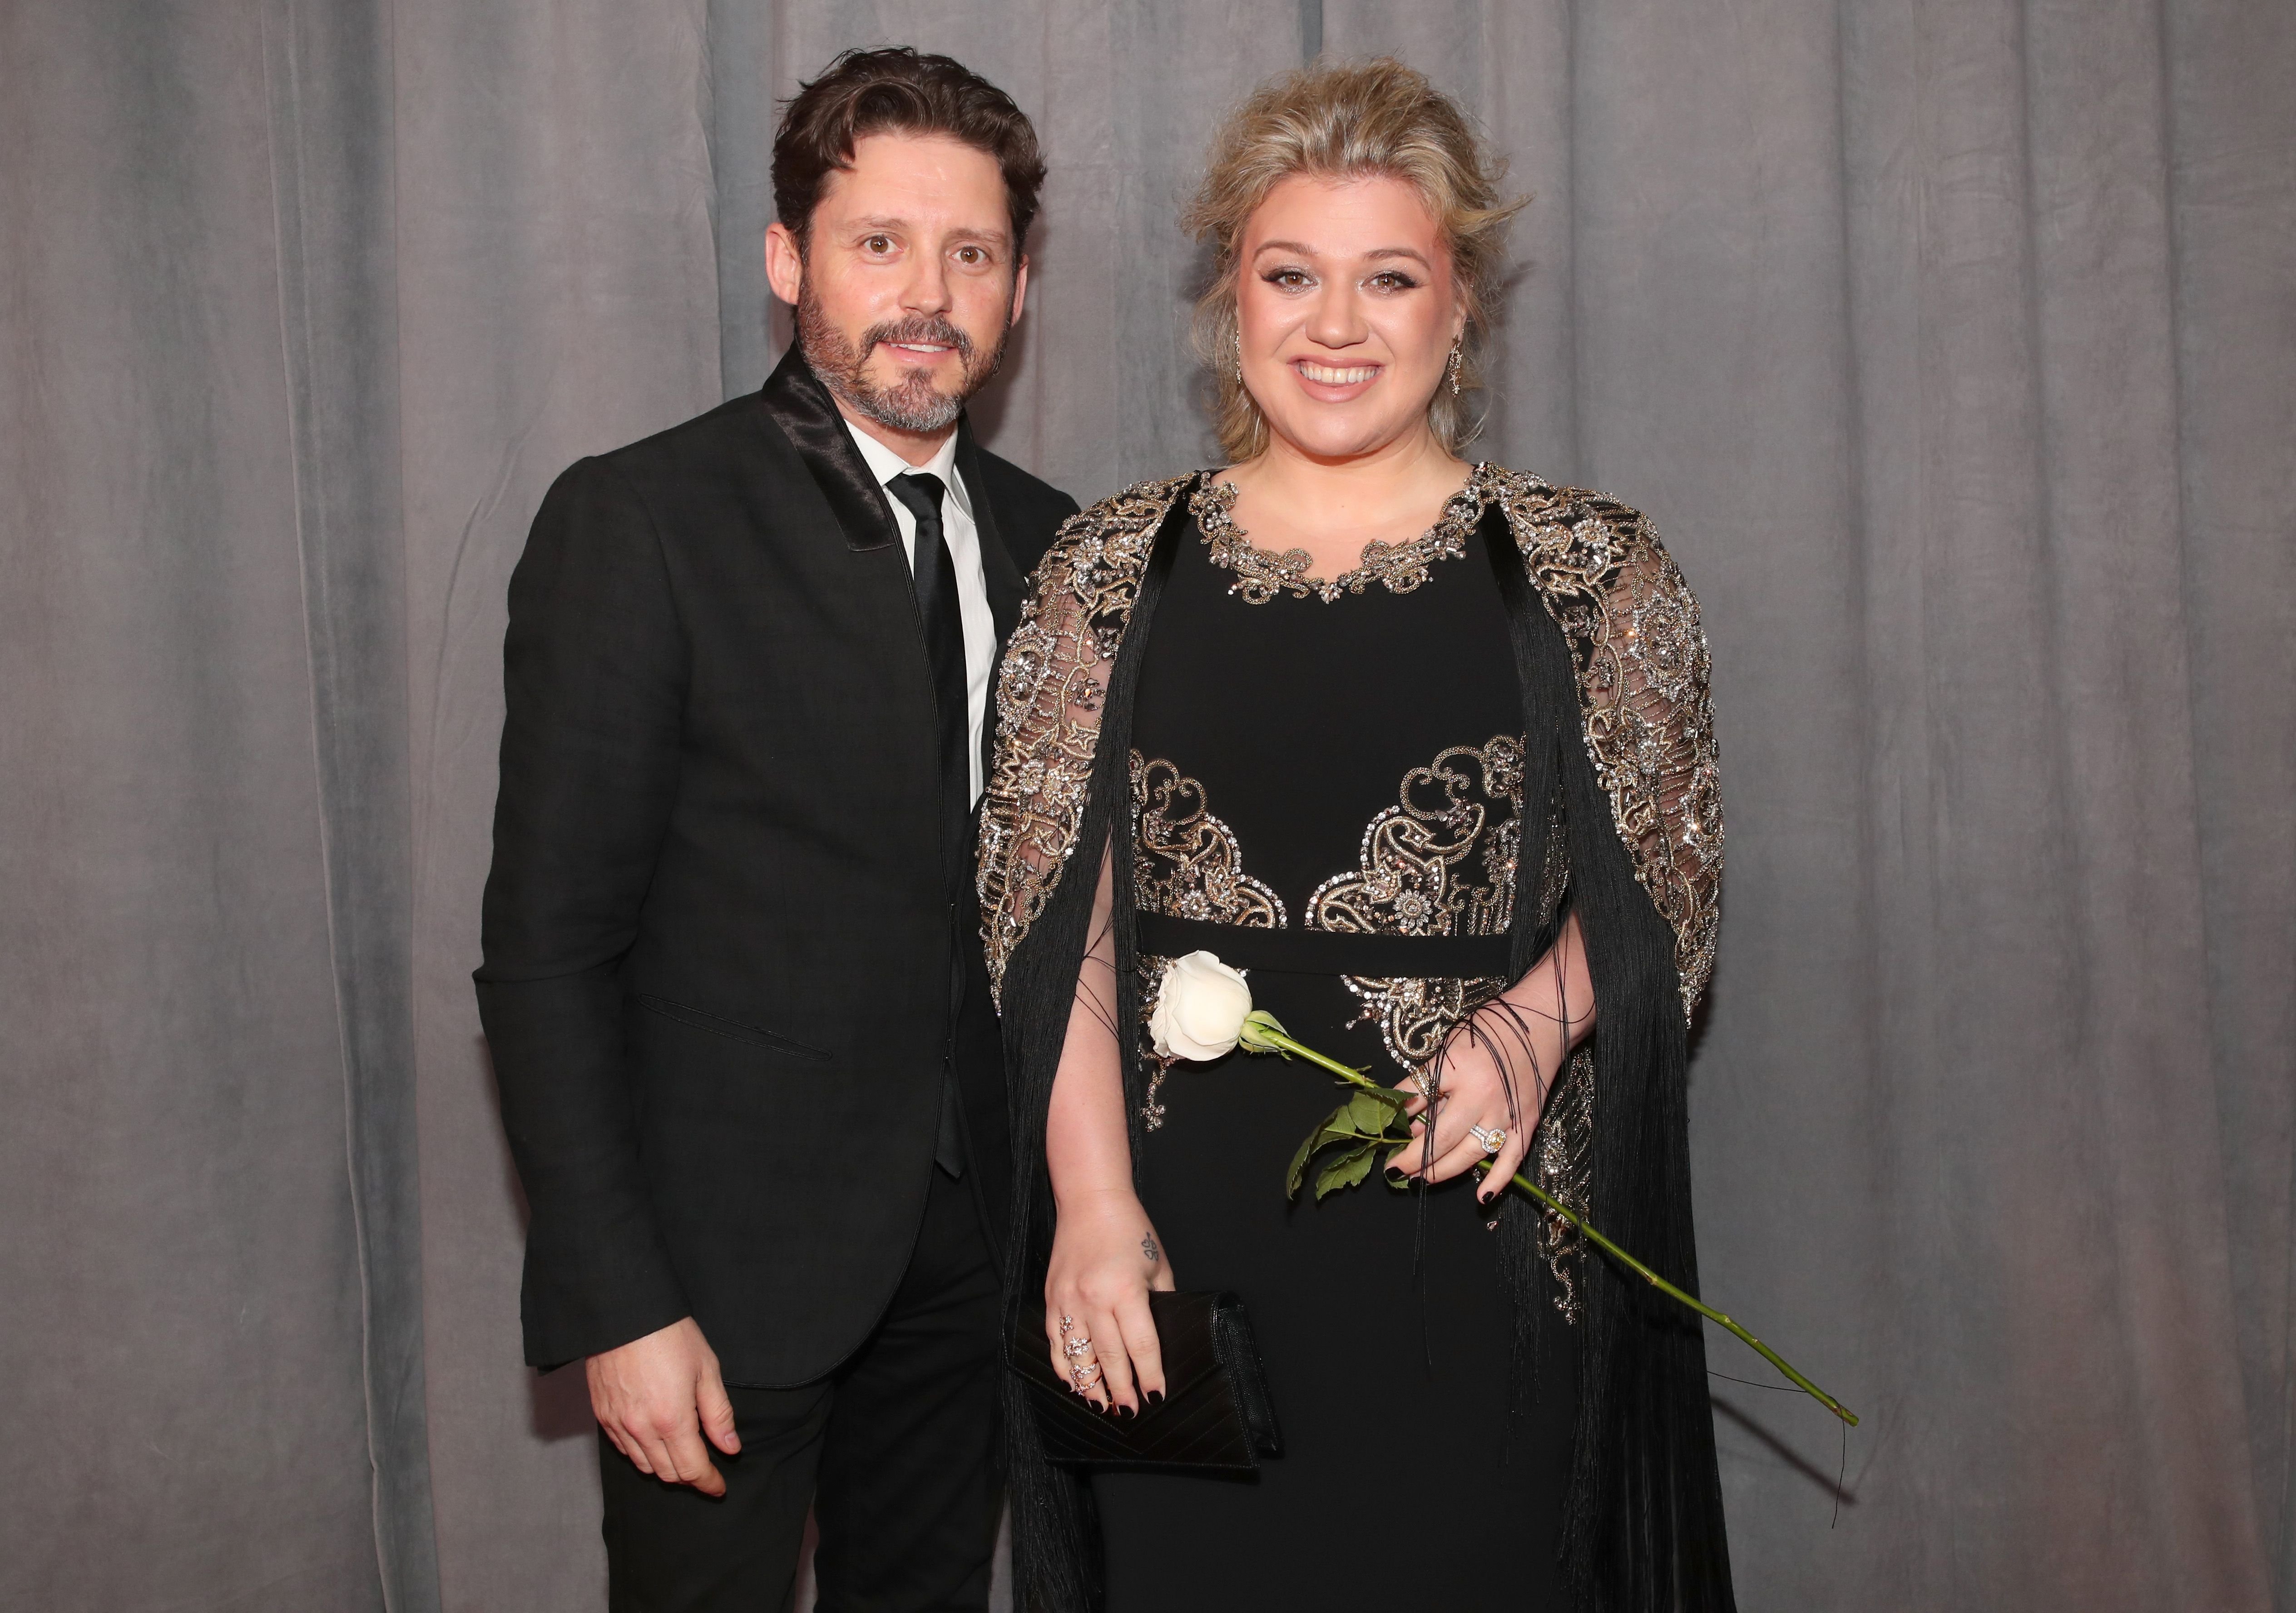 Brandon Blackstock and Kelly Clarkson at the 60th Annual GRAMMY Awards at Madison Square Garden on January 28, 2018 in New York City | Photo: Getty Images